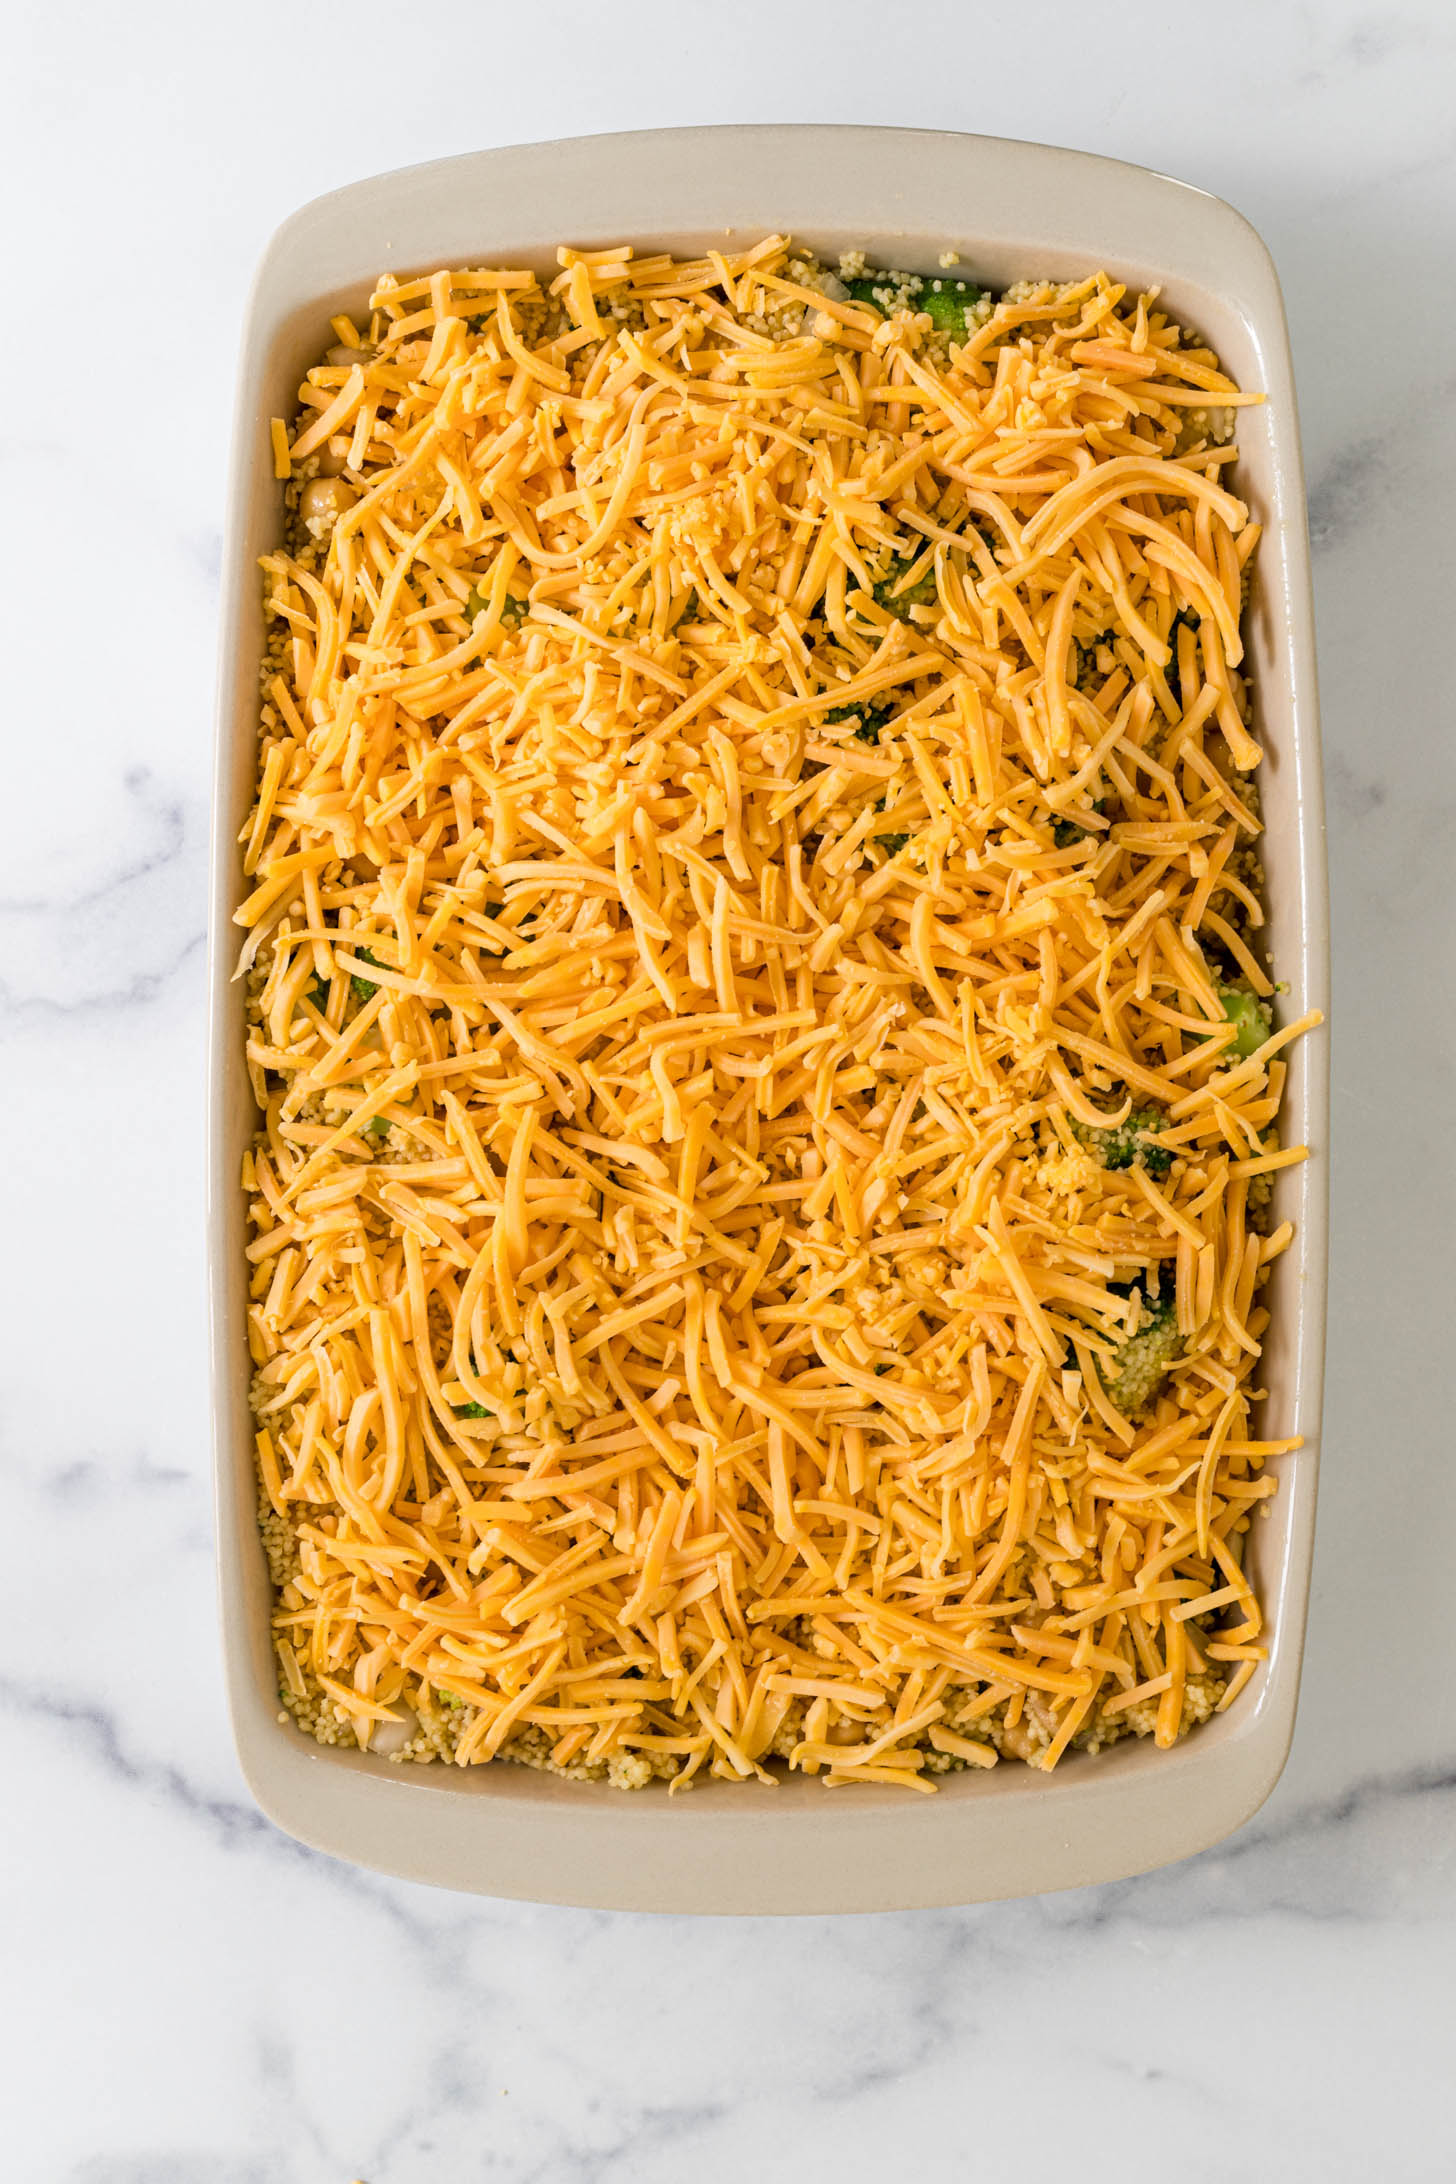 Shredded cheese layered over ingredients in a baking dish.